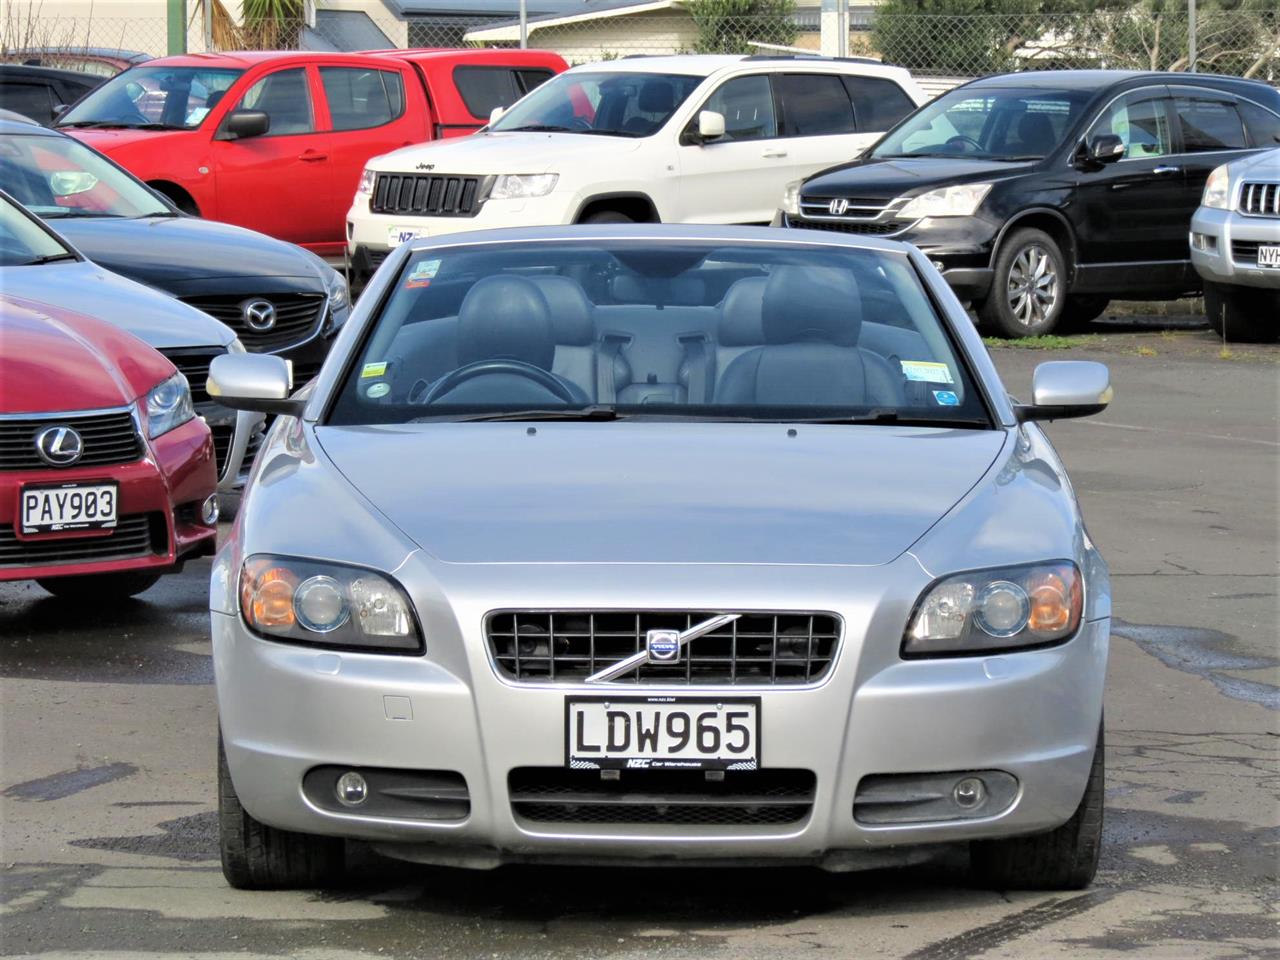 2007 Volvo C70 only $47 weekly